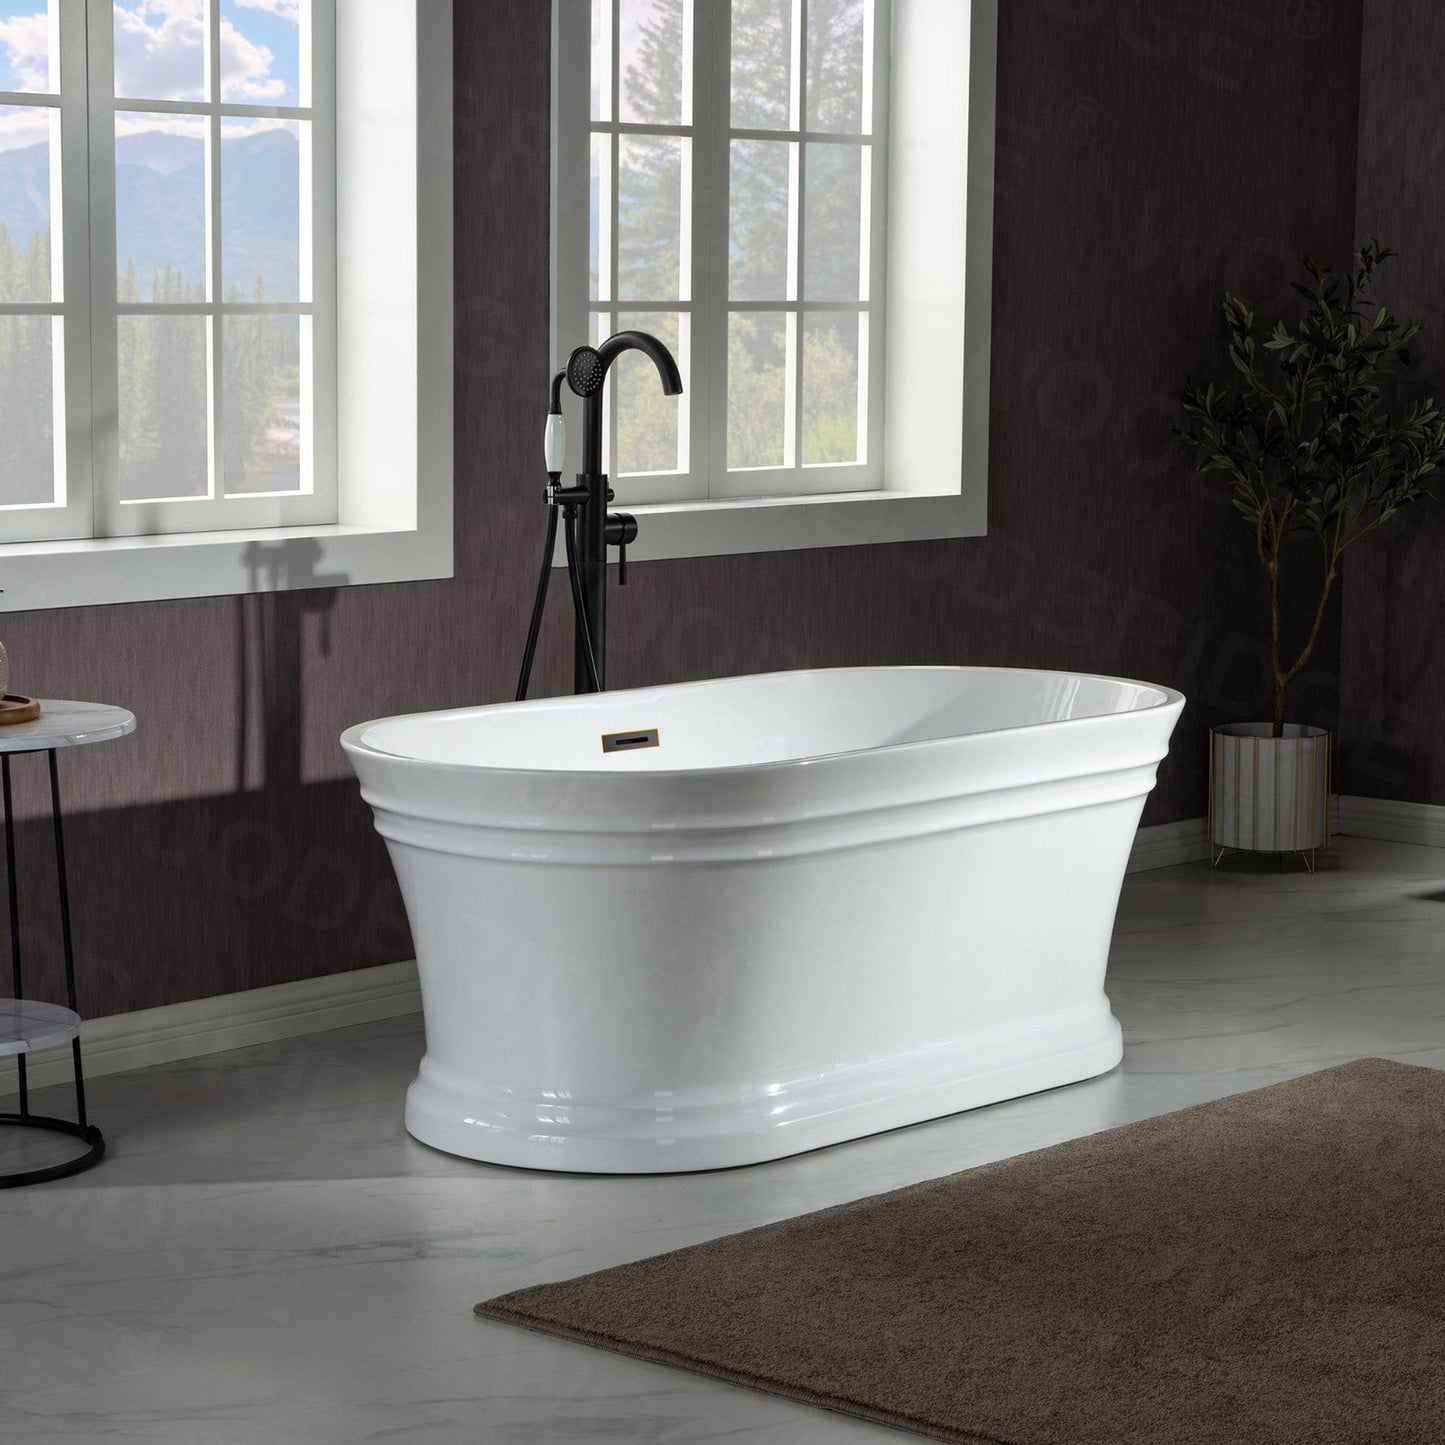 WoodBridge 67" Glossy White Lucite Acrylic Freestanding Double Ended Soaking Bathtub With Oil Rubbed Bronze Center Drain Assembly and Overflow